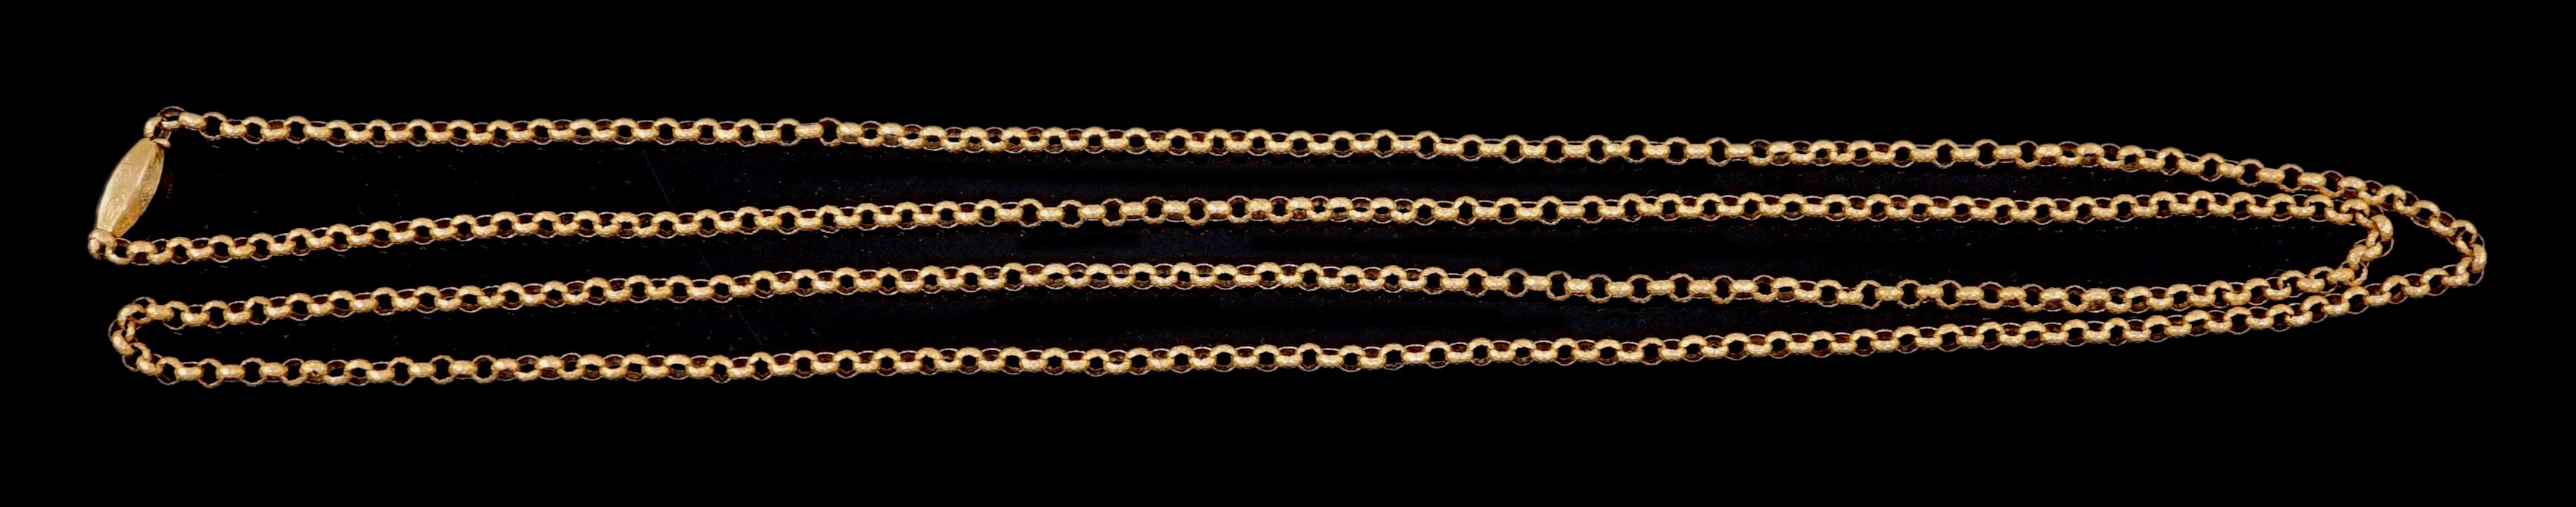 An early 19th century gold guard chain                                                                                                                                                                                      